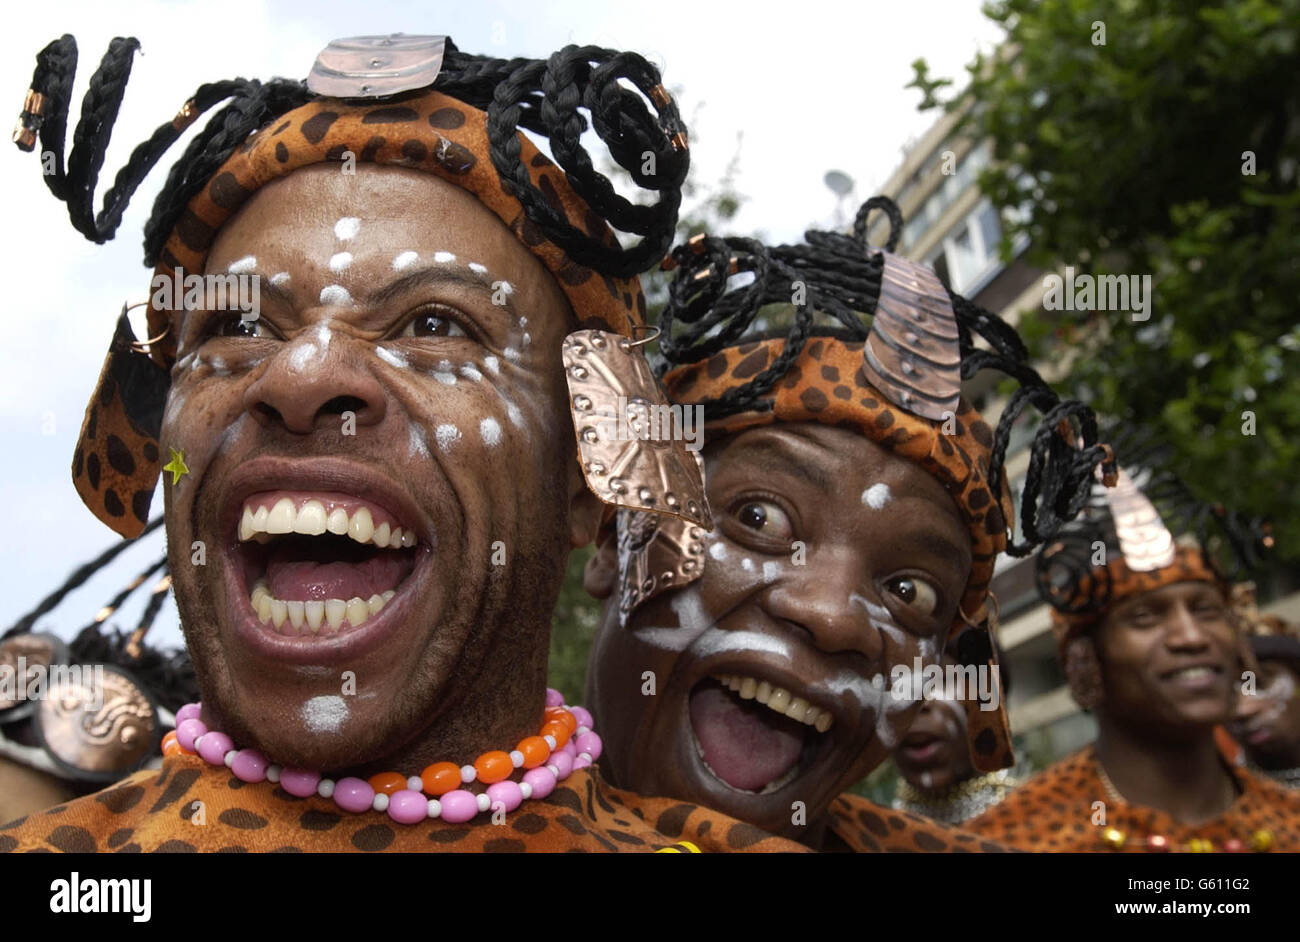 Members of the Umoja procession take part at the Notting Hill carnival, London. A police spokeswoman said 10,000 officers would be on duty over the two days, with 350 specially trained stewards, in an effort to prevent any trouble. * marring the largest street party in Europe. Stock Photo